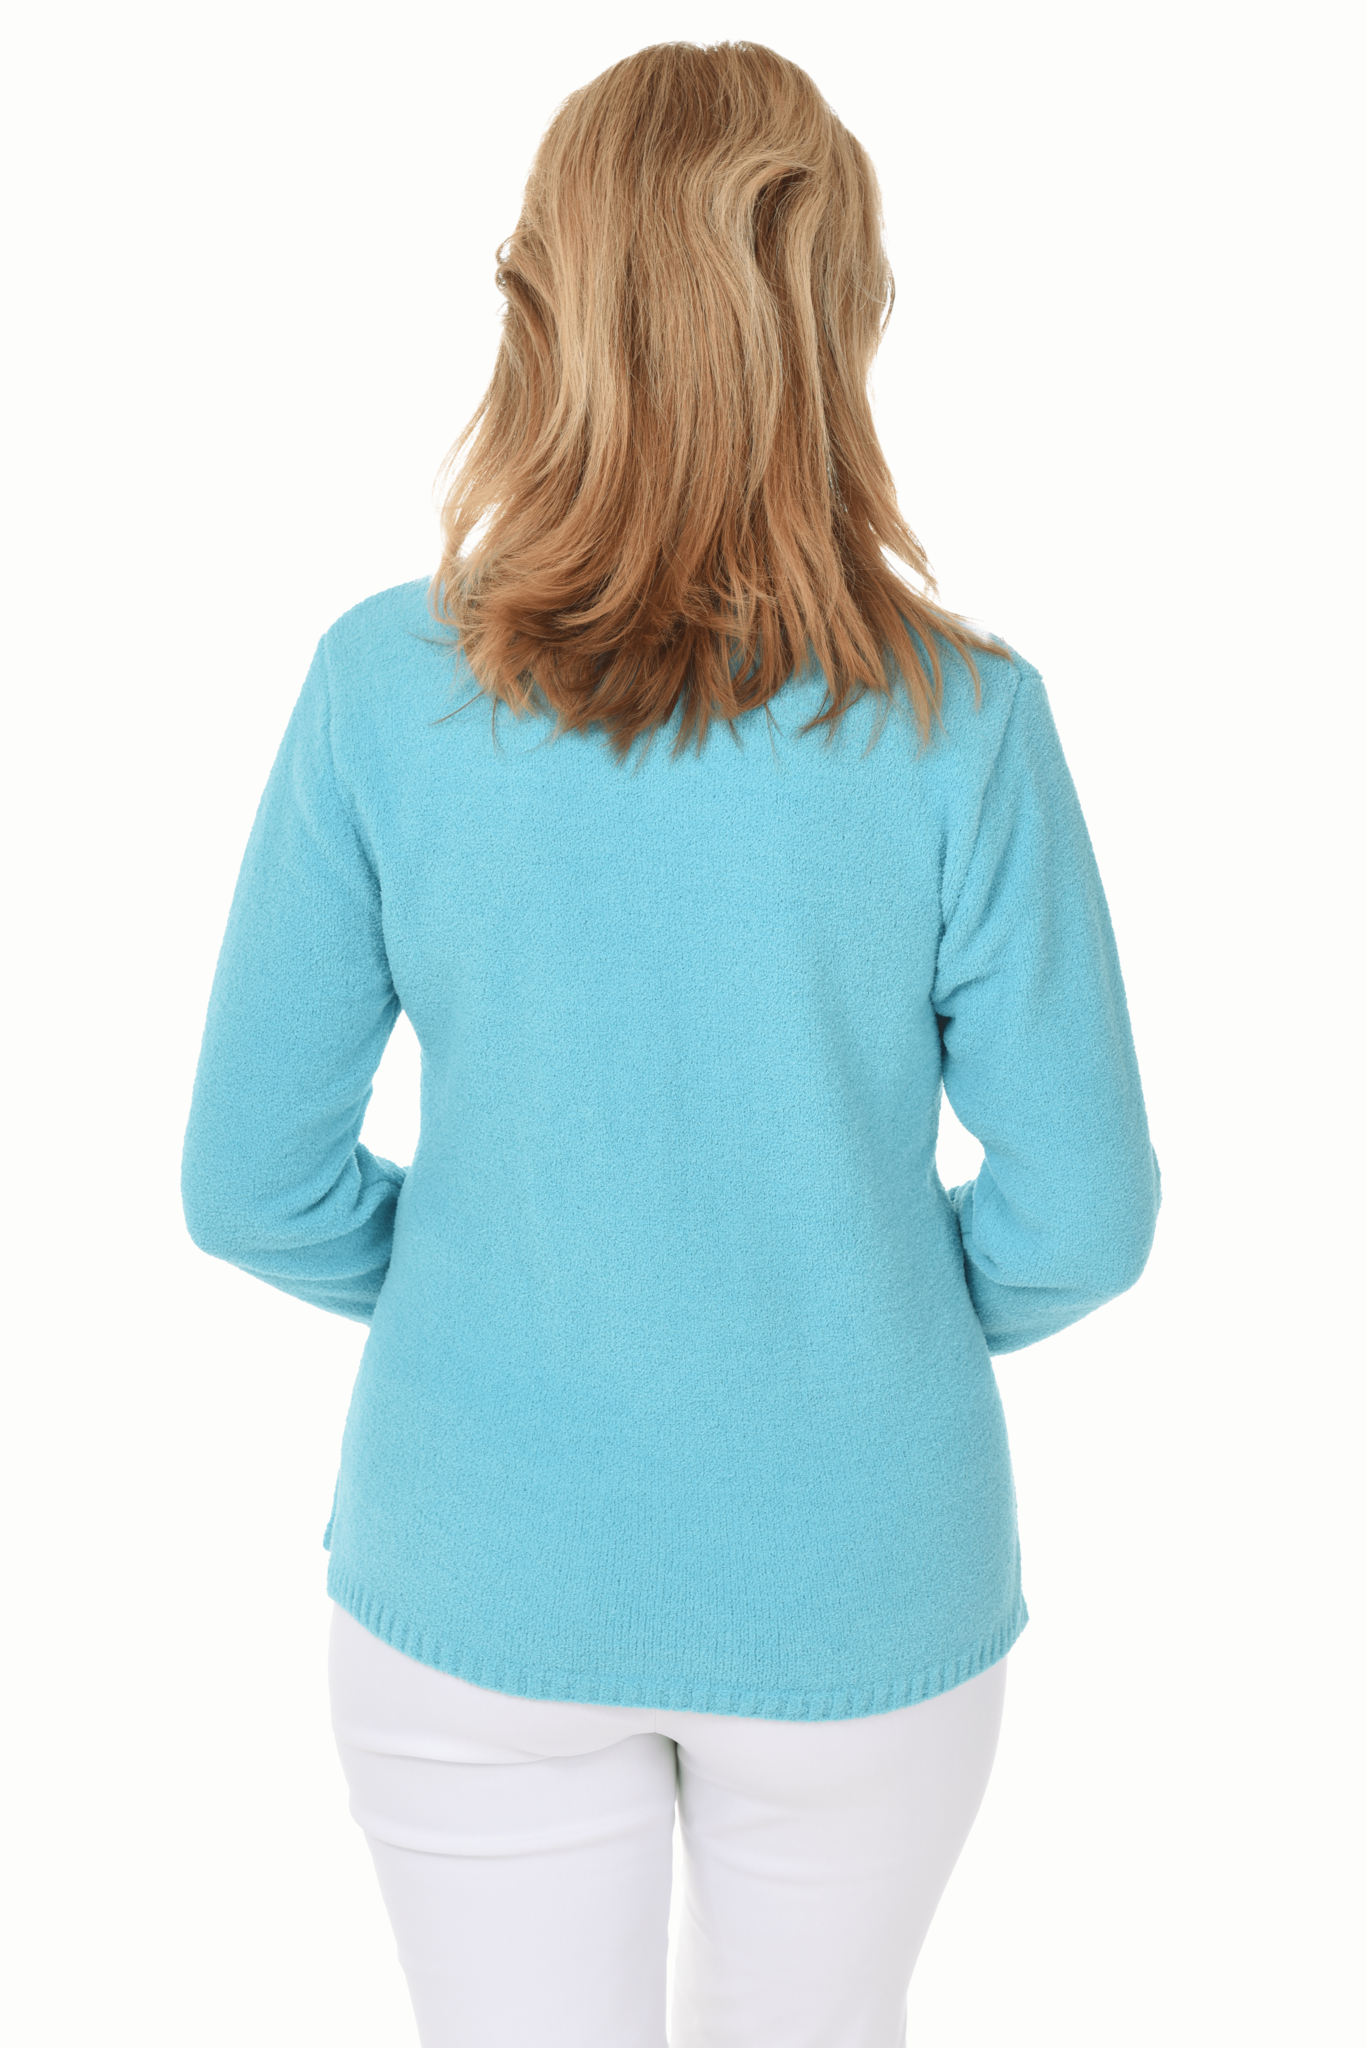 Turquoise Anchor Embroidered Cardigan